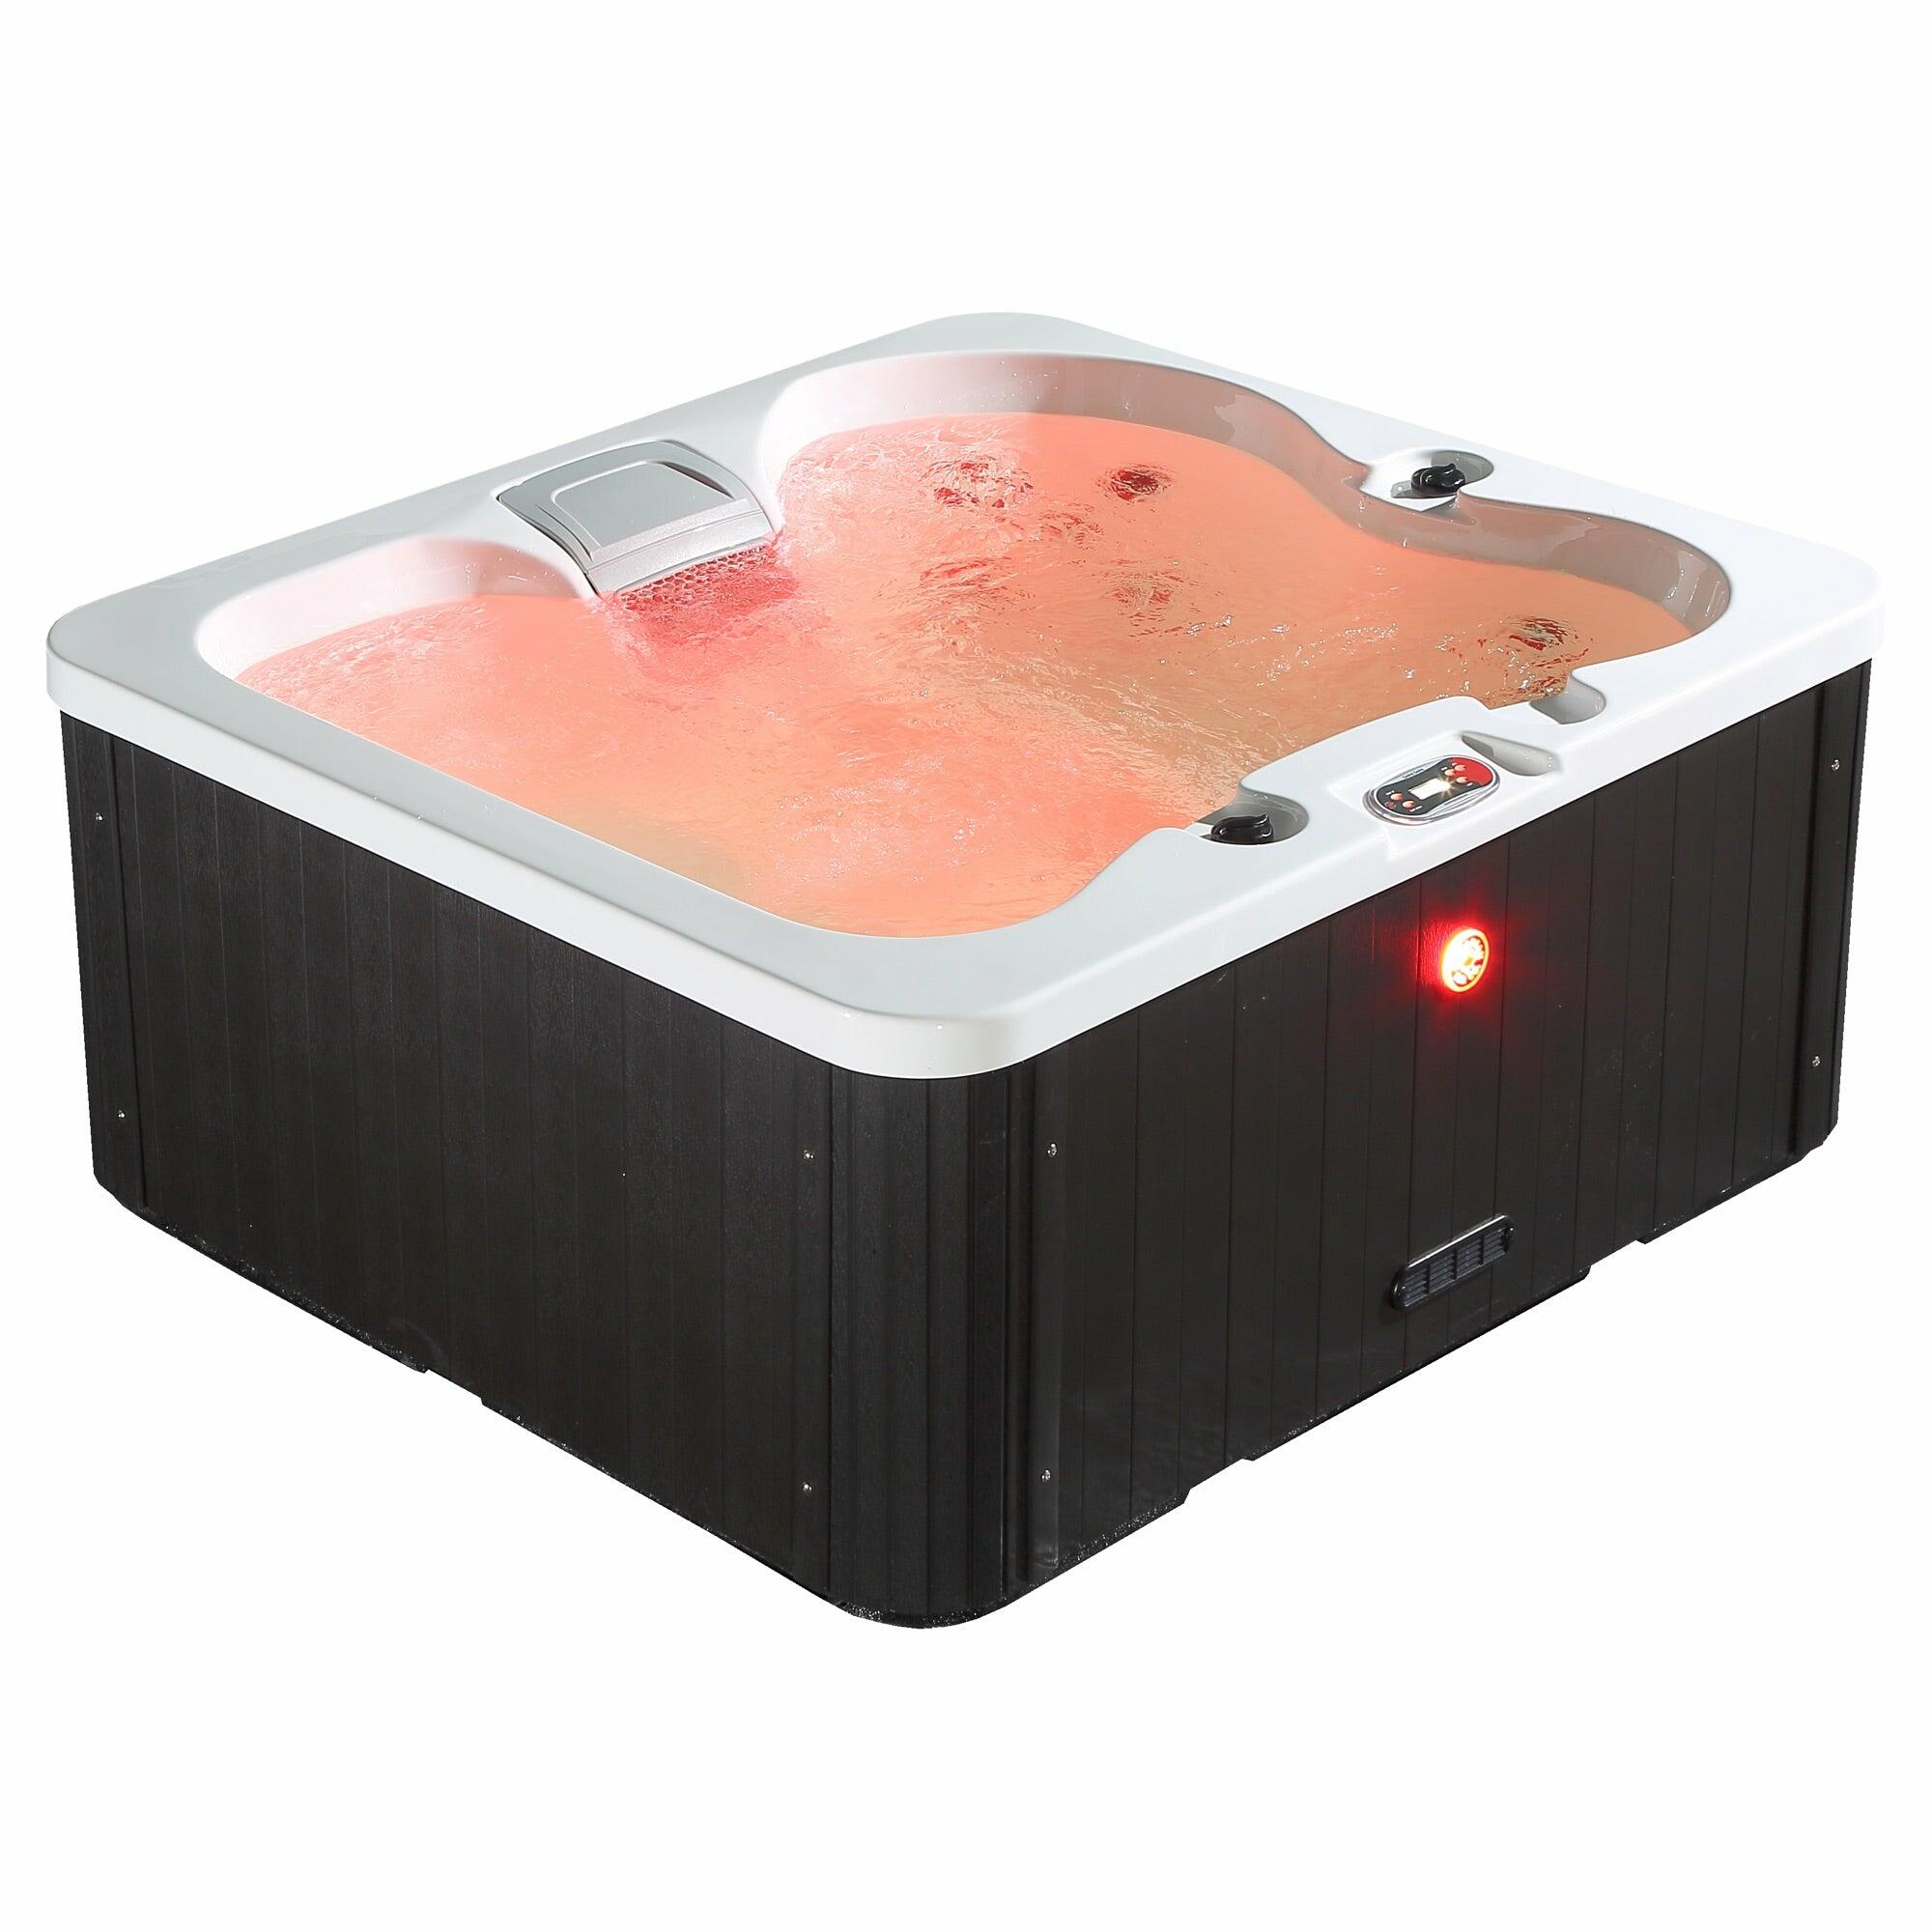 An image of Canadian Spa Manitoba 14 Jet 4 Person Hot Tub